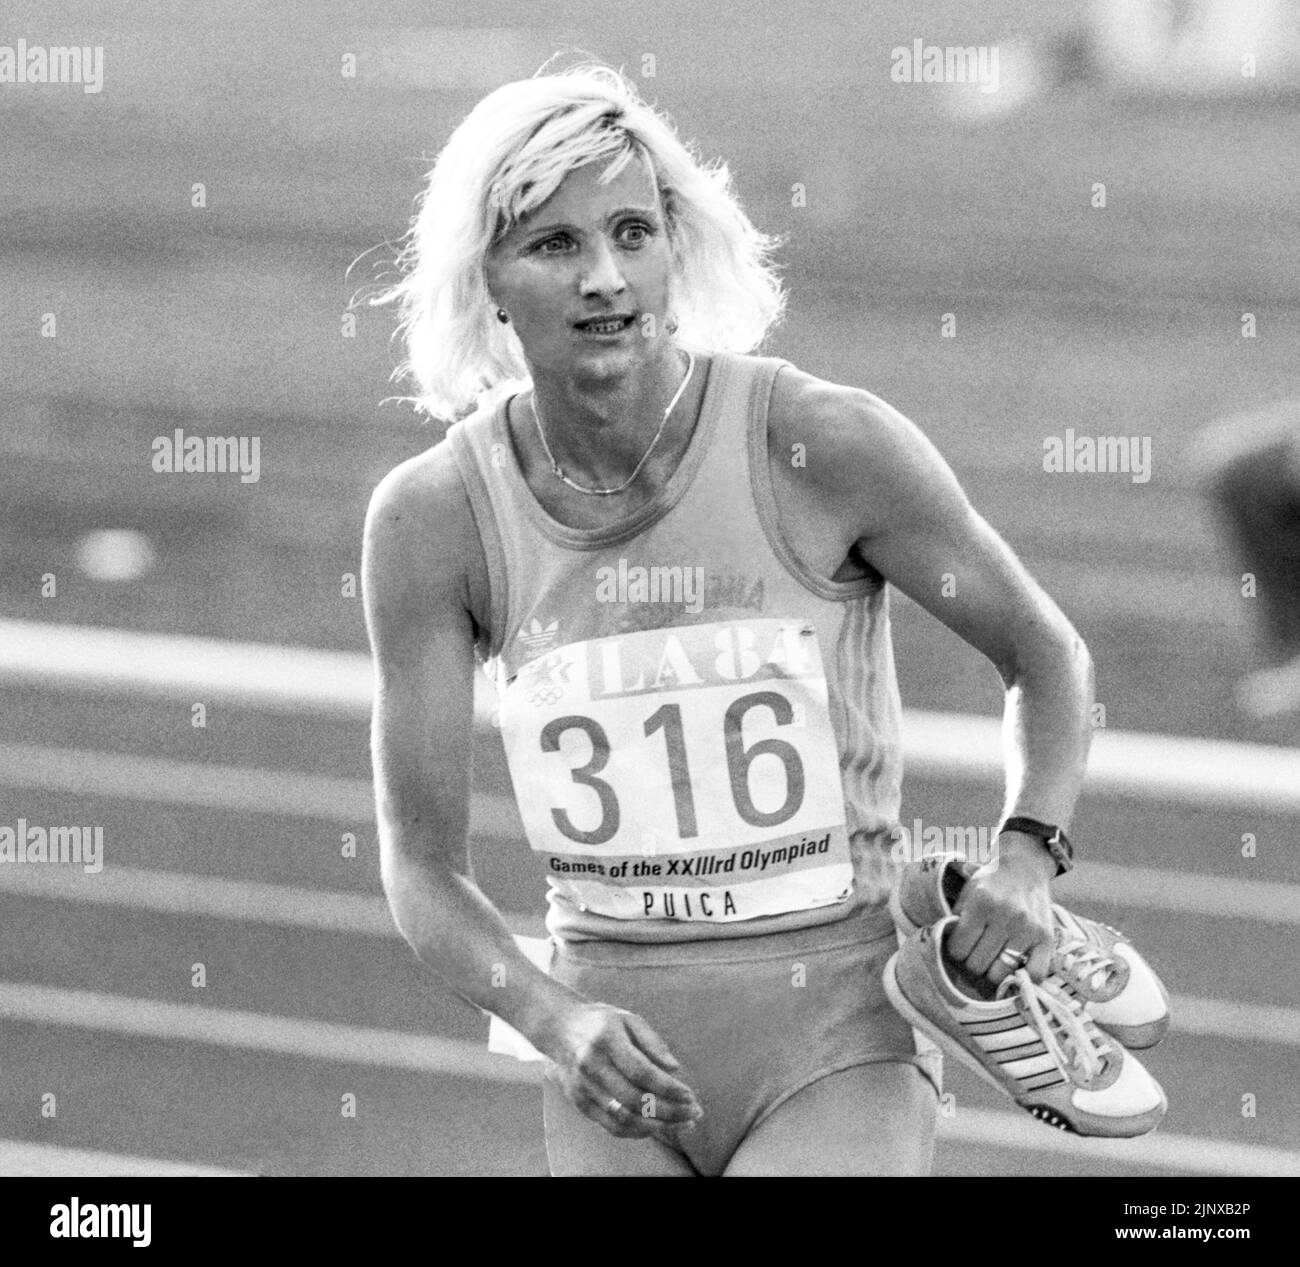 OLYMPIC SUMMER GAMES IN LOS ANGELES 1984 MARICICA PUICA Romania gold medalist at 3000m Stock Photo